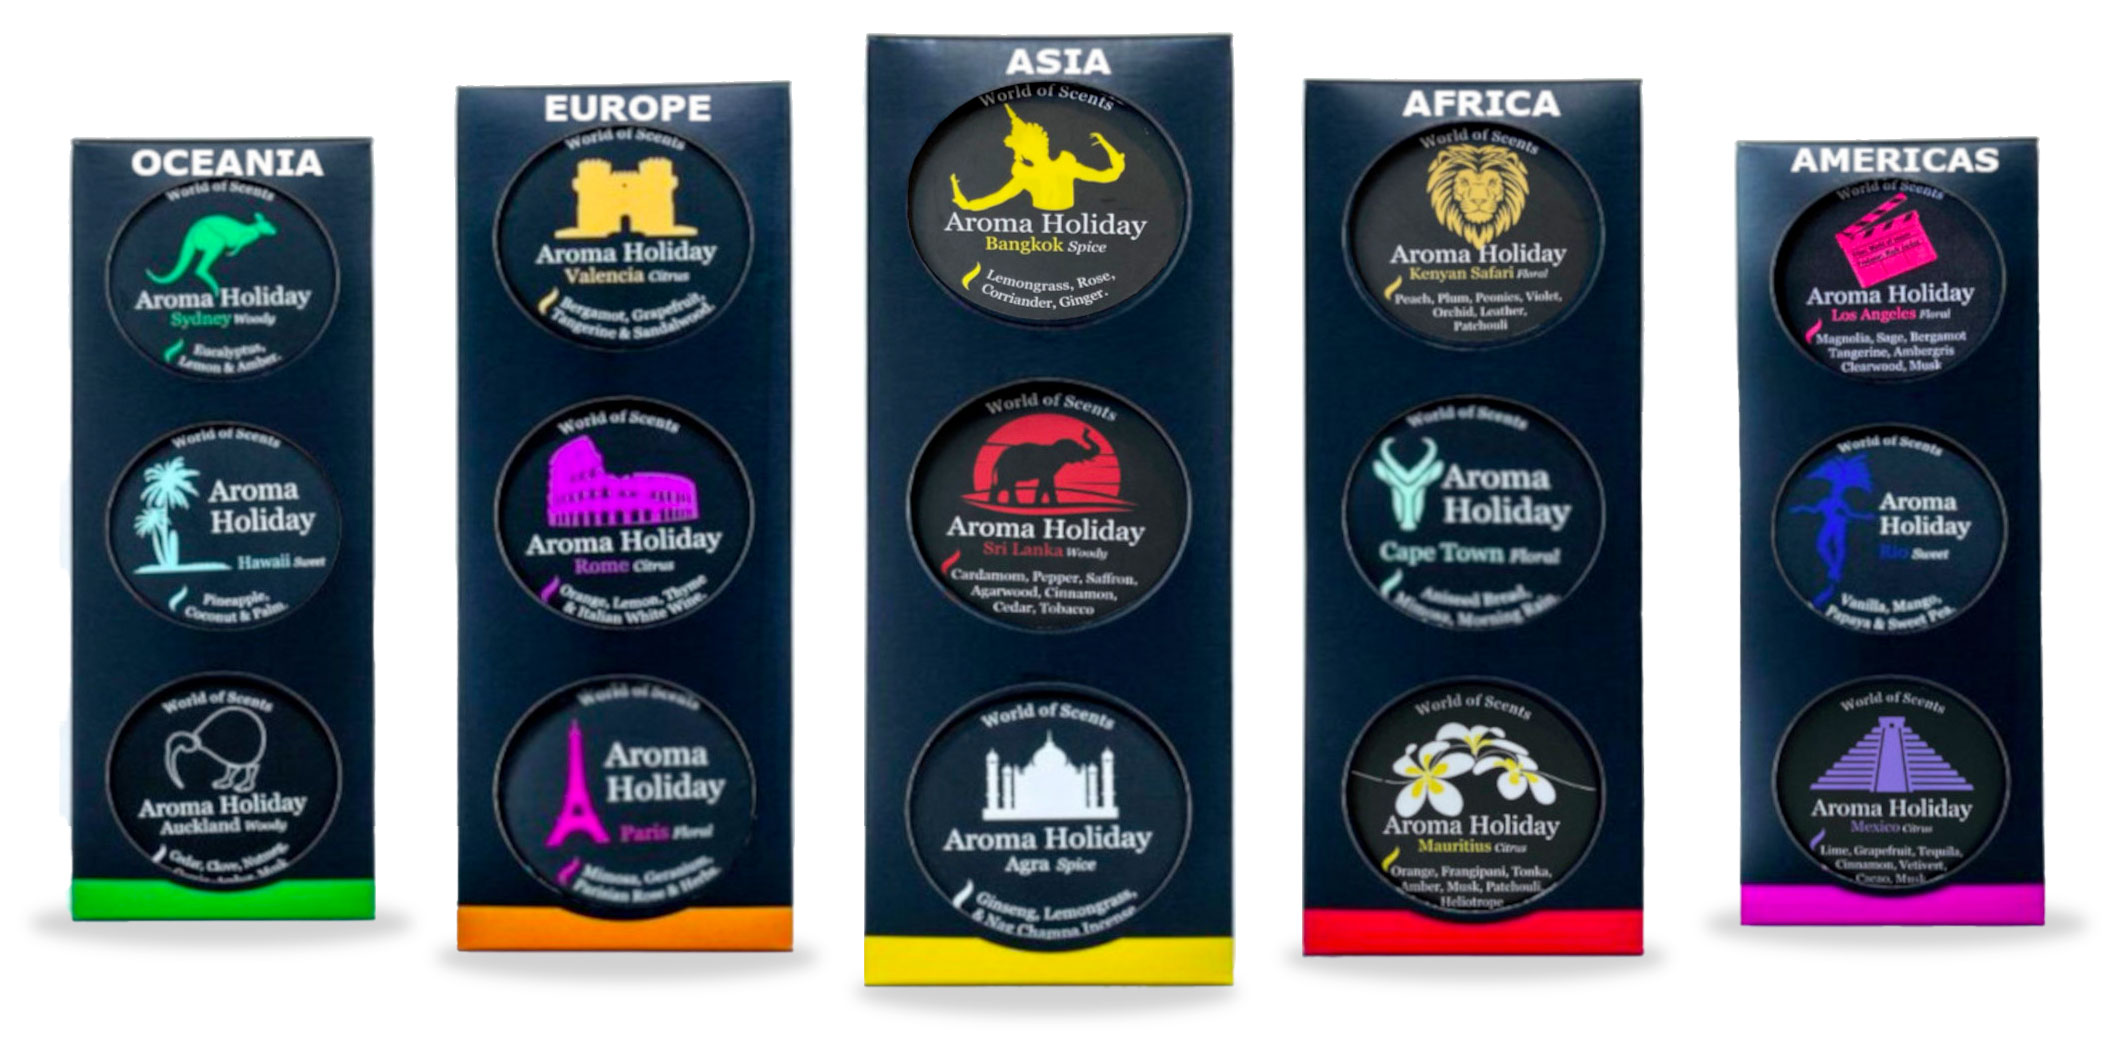 Luxury candles of World Travel Retail